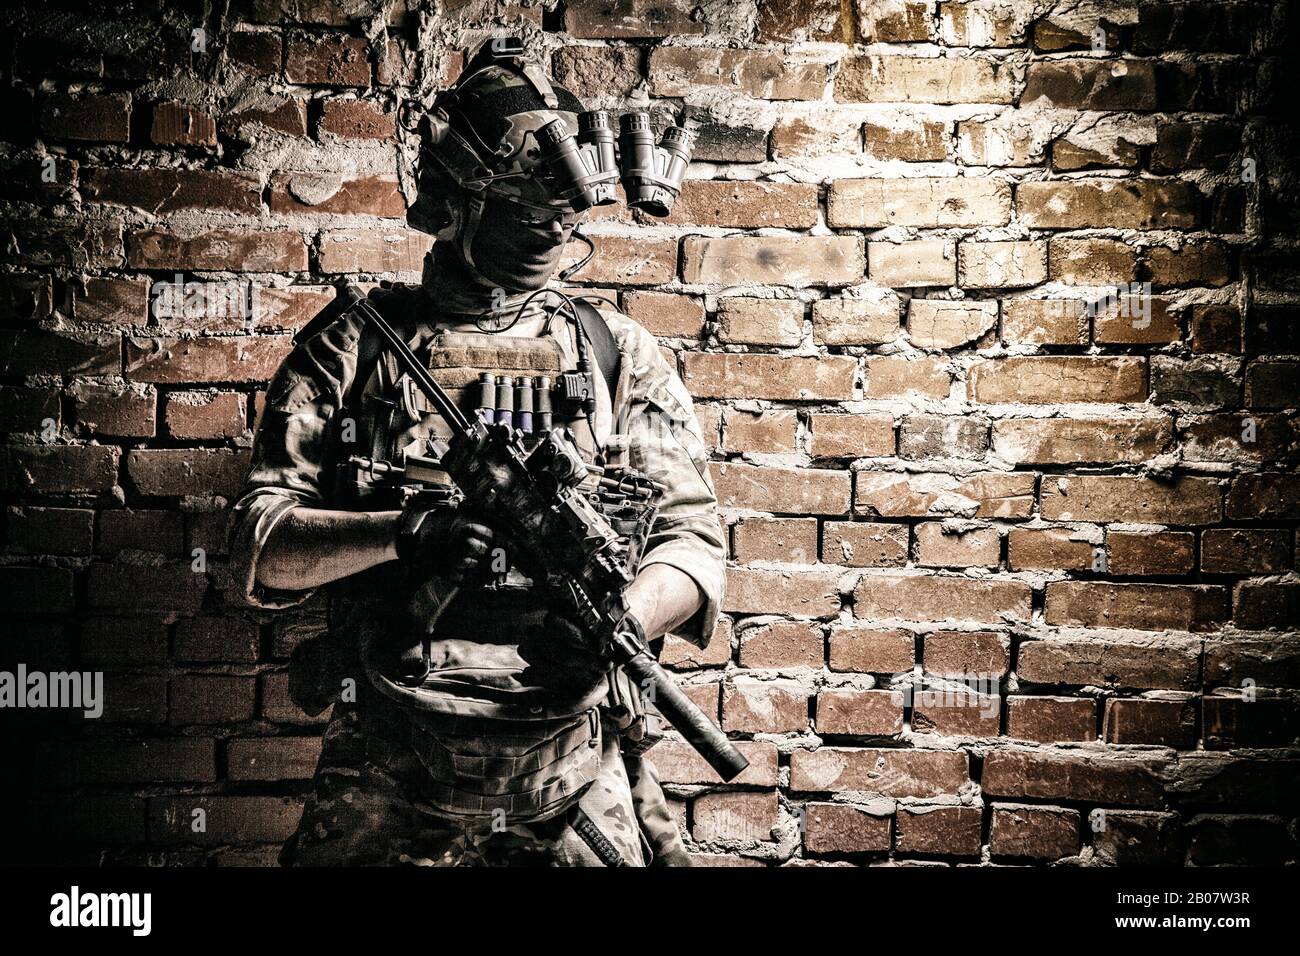 Special operations forces soldier, counter terrorism assault team fighter with night vision device on helmet and service rifle, low key indoor shot brick wall Stock Photo